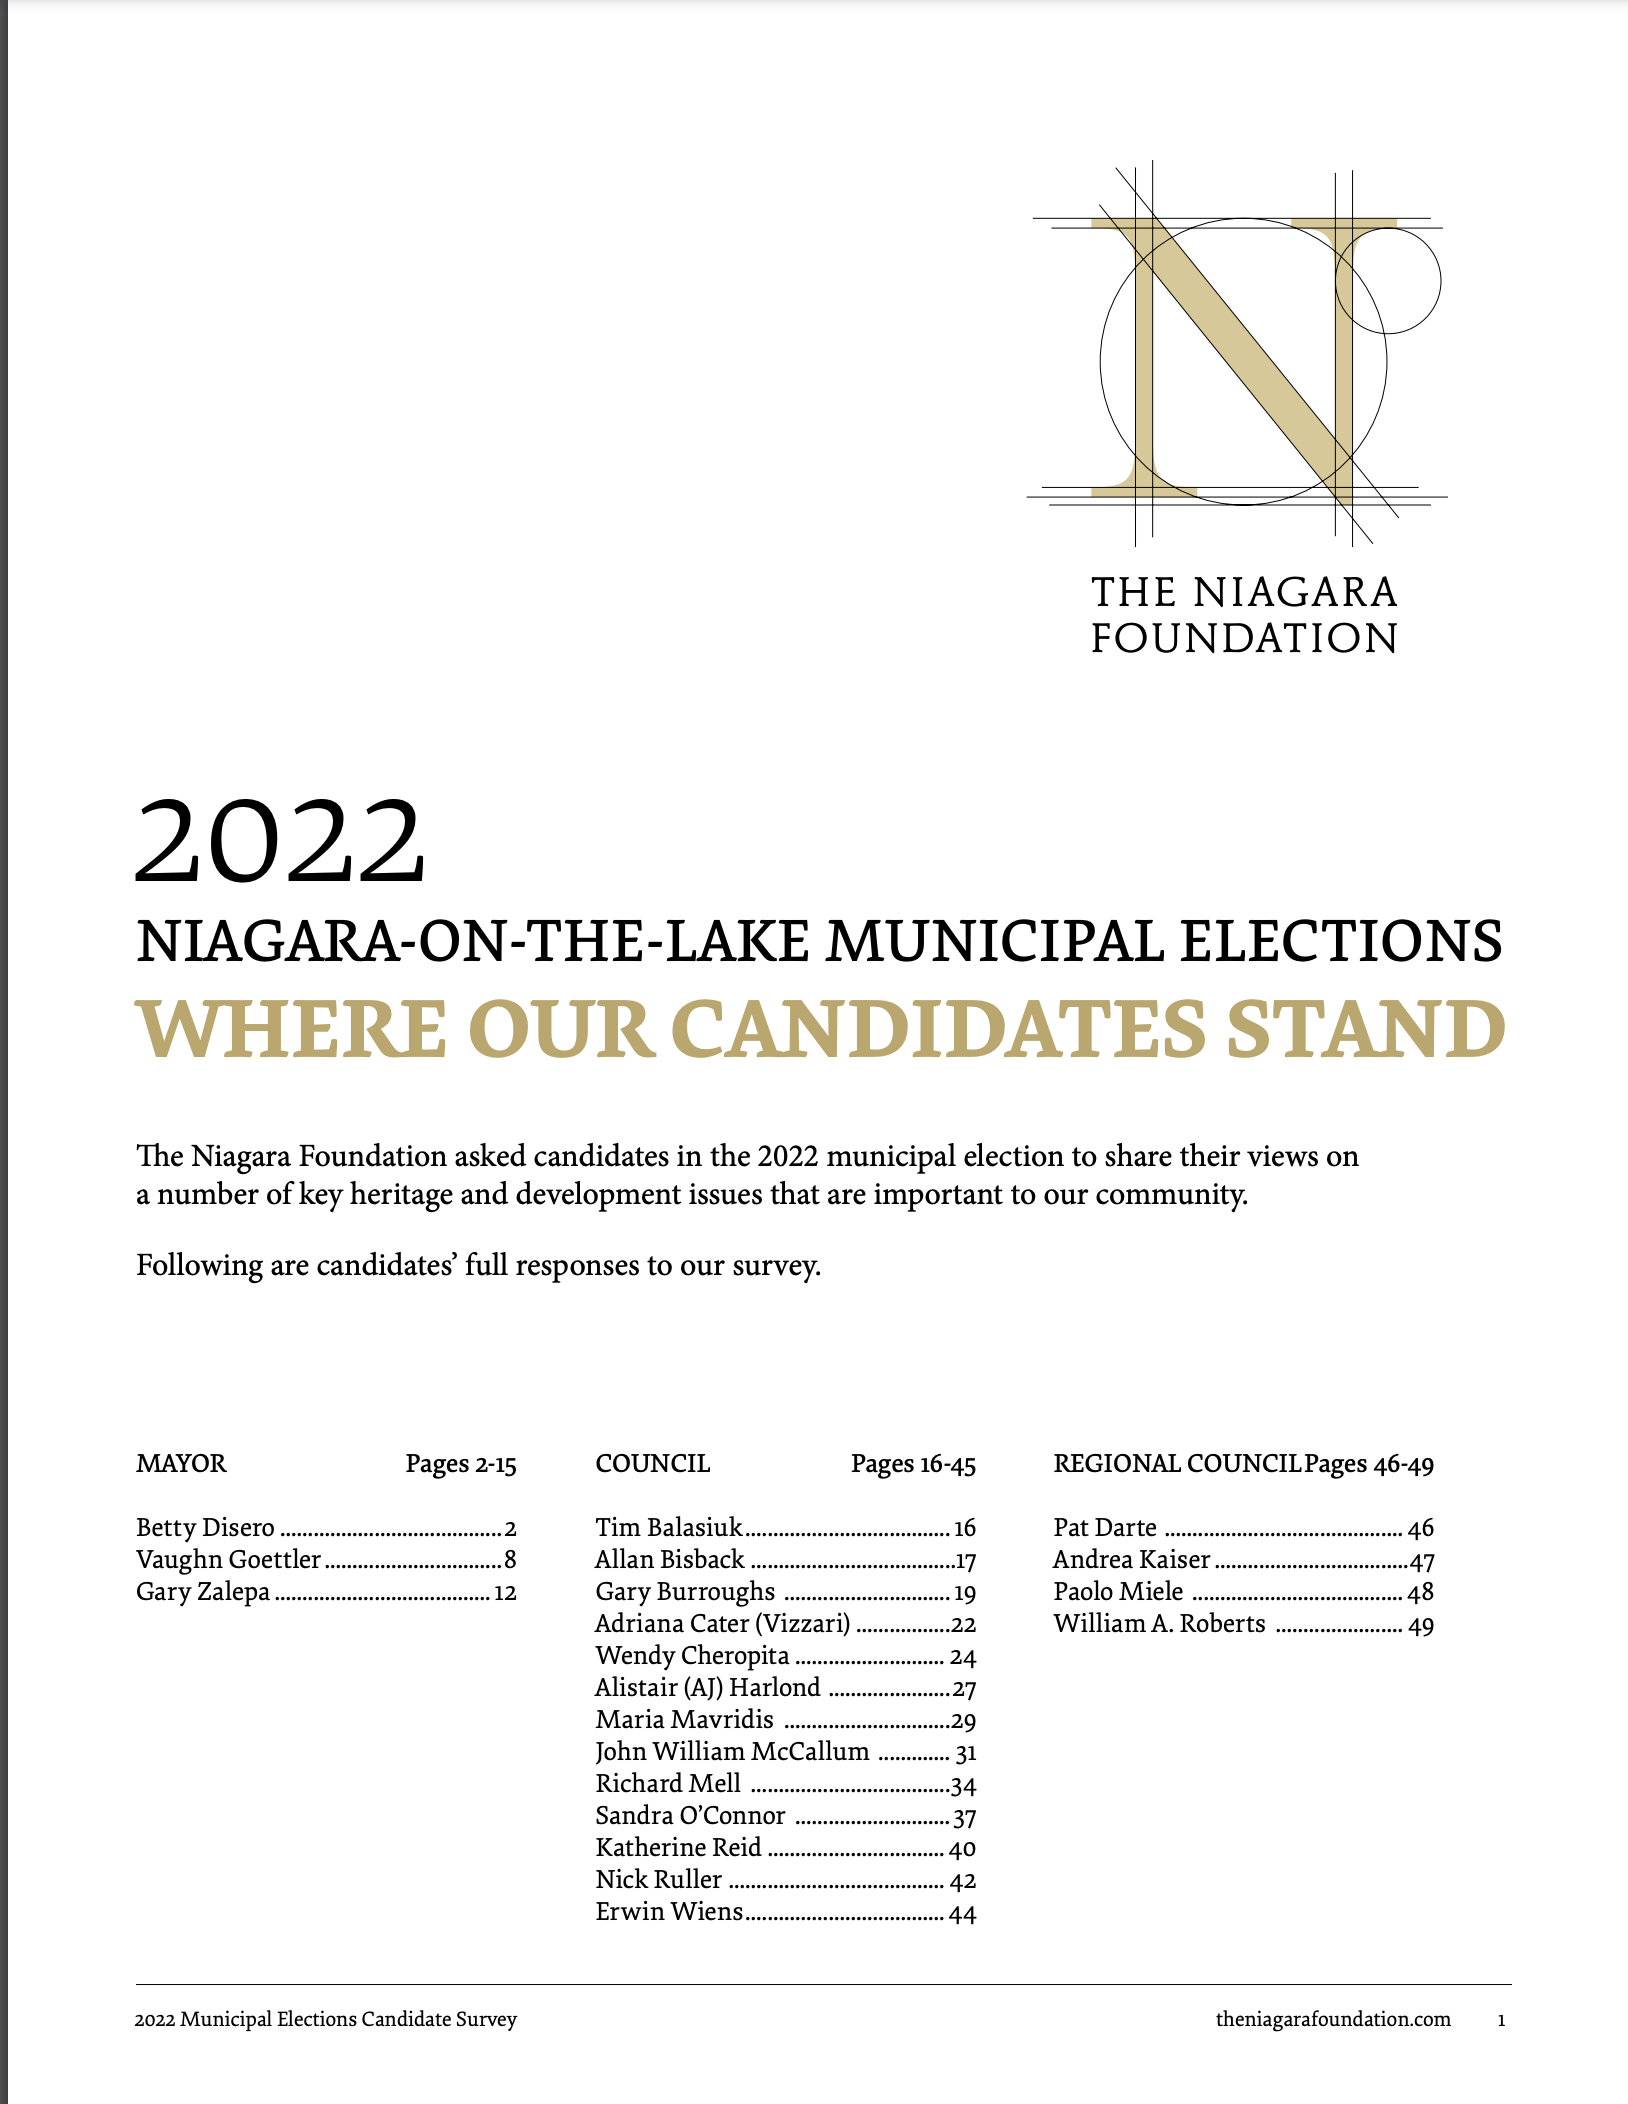 Where candidates stand 2022